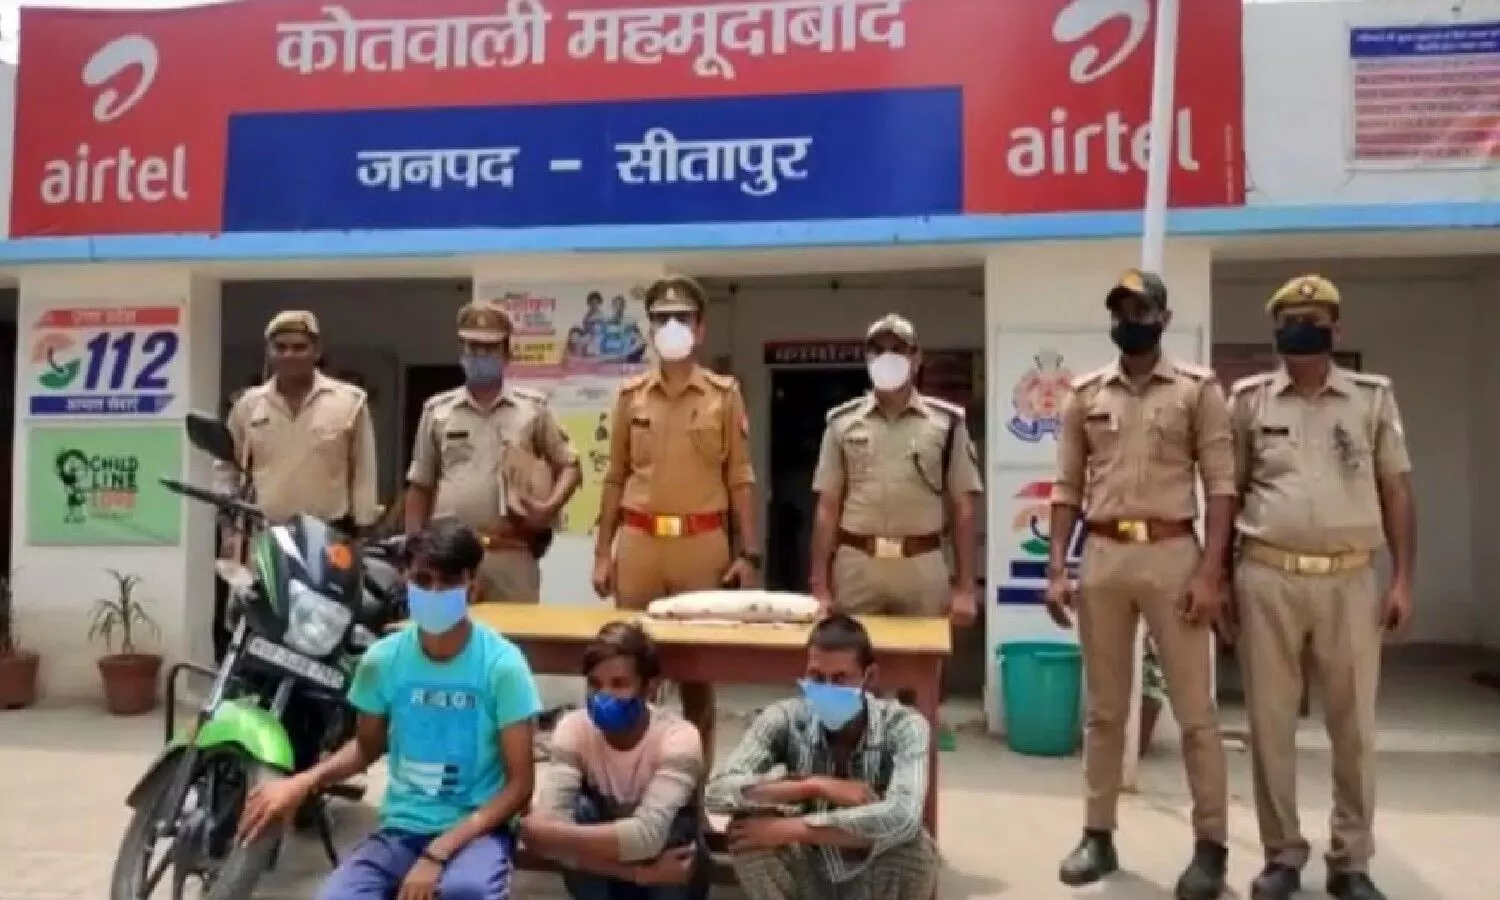 The police has disclosed the robbery with the liquor salesman in Sitapur.